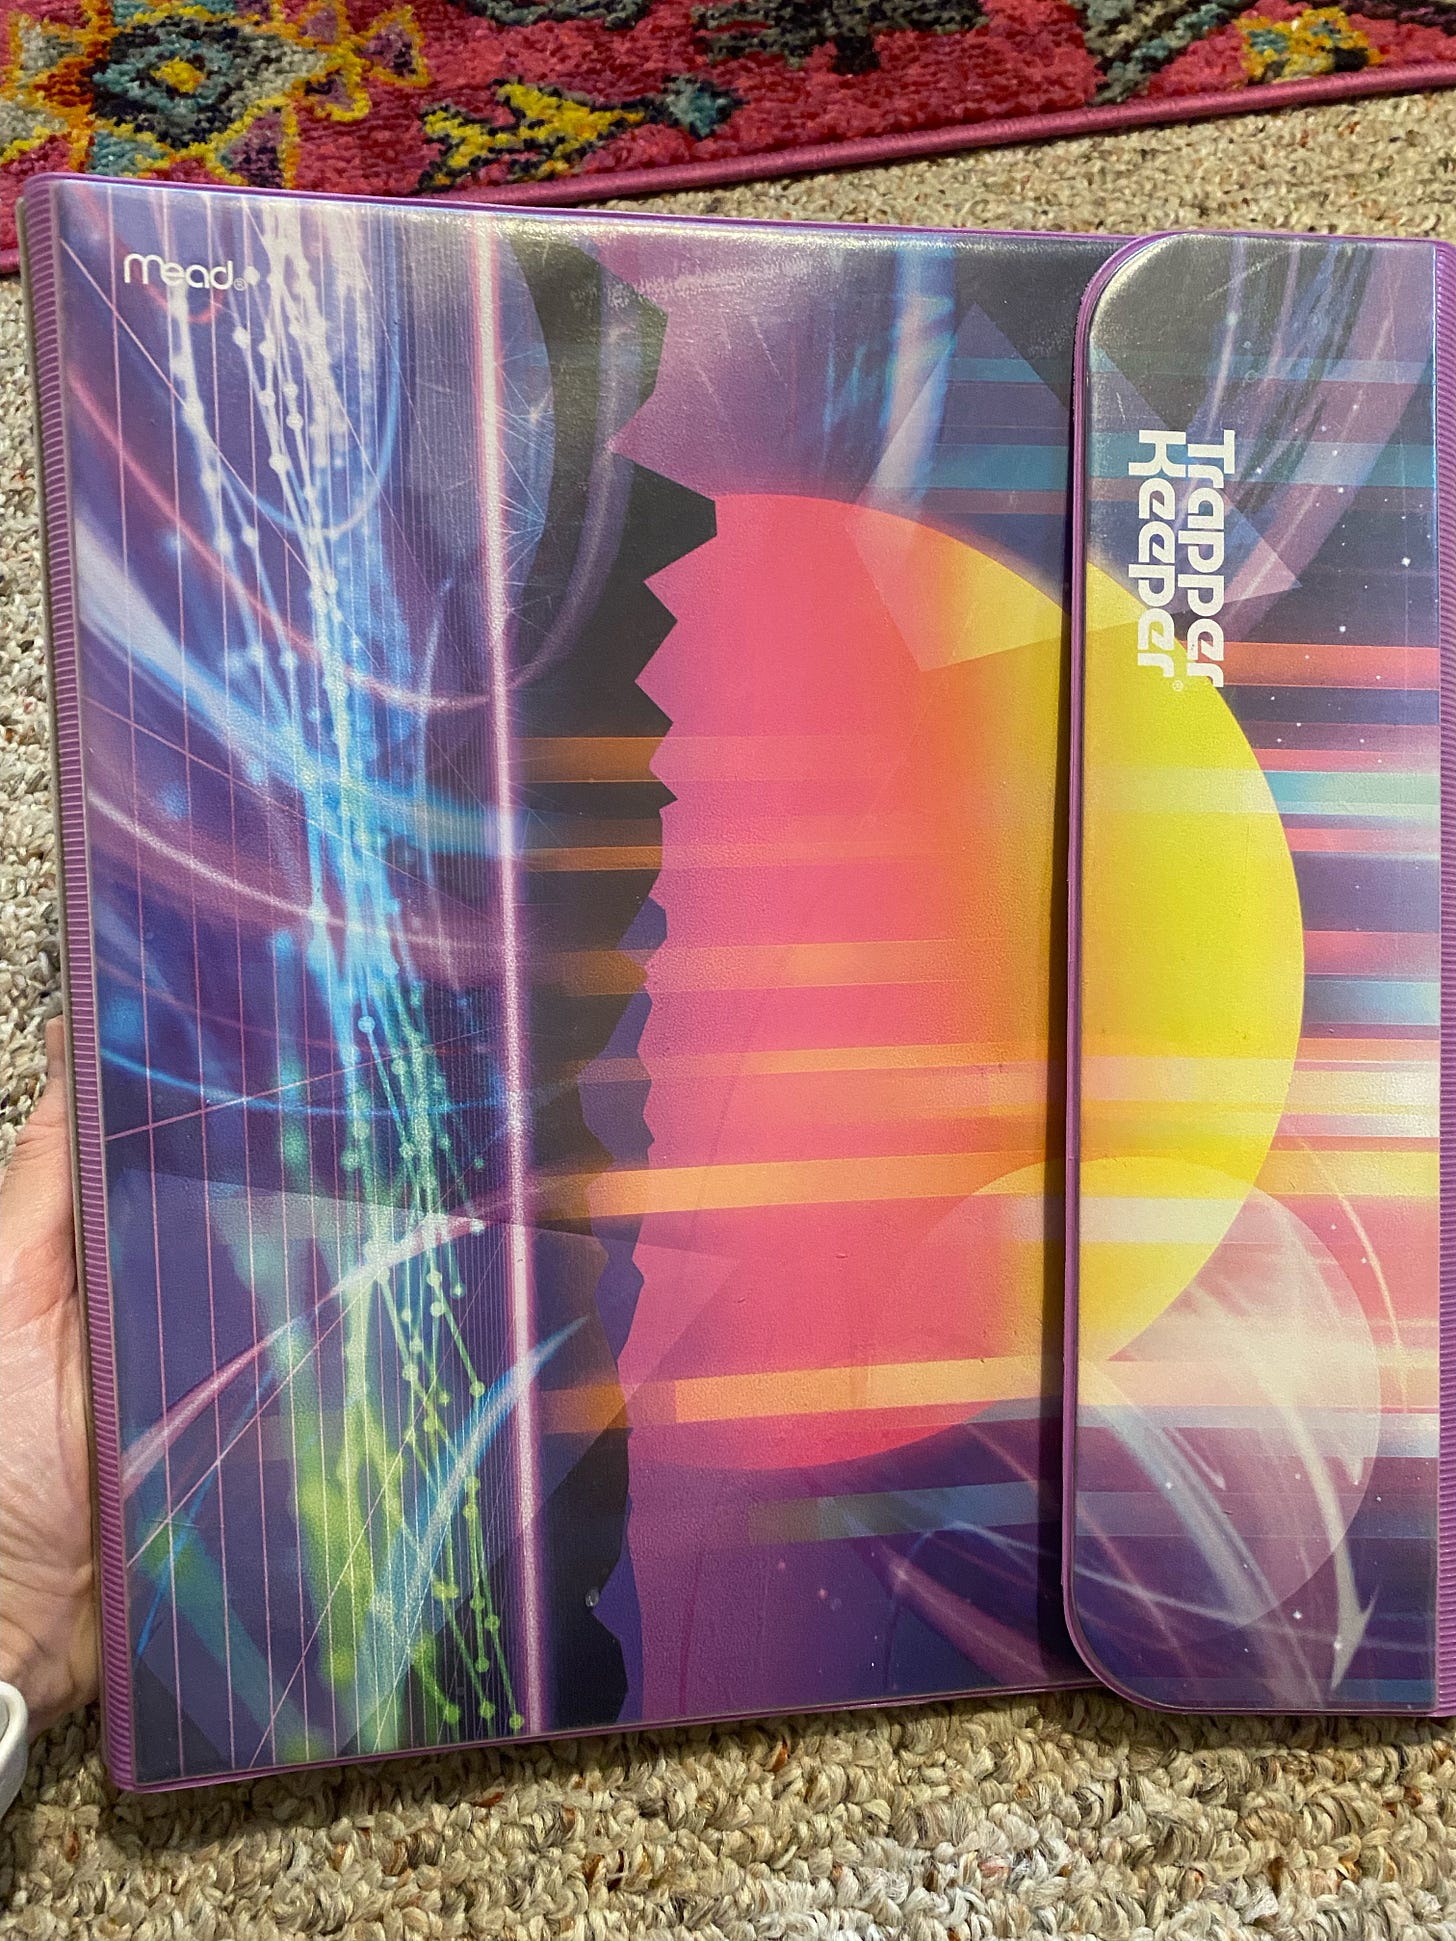 purple trapper keeper with sunset on cover